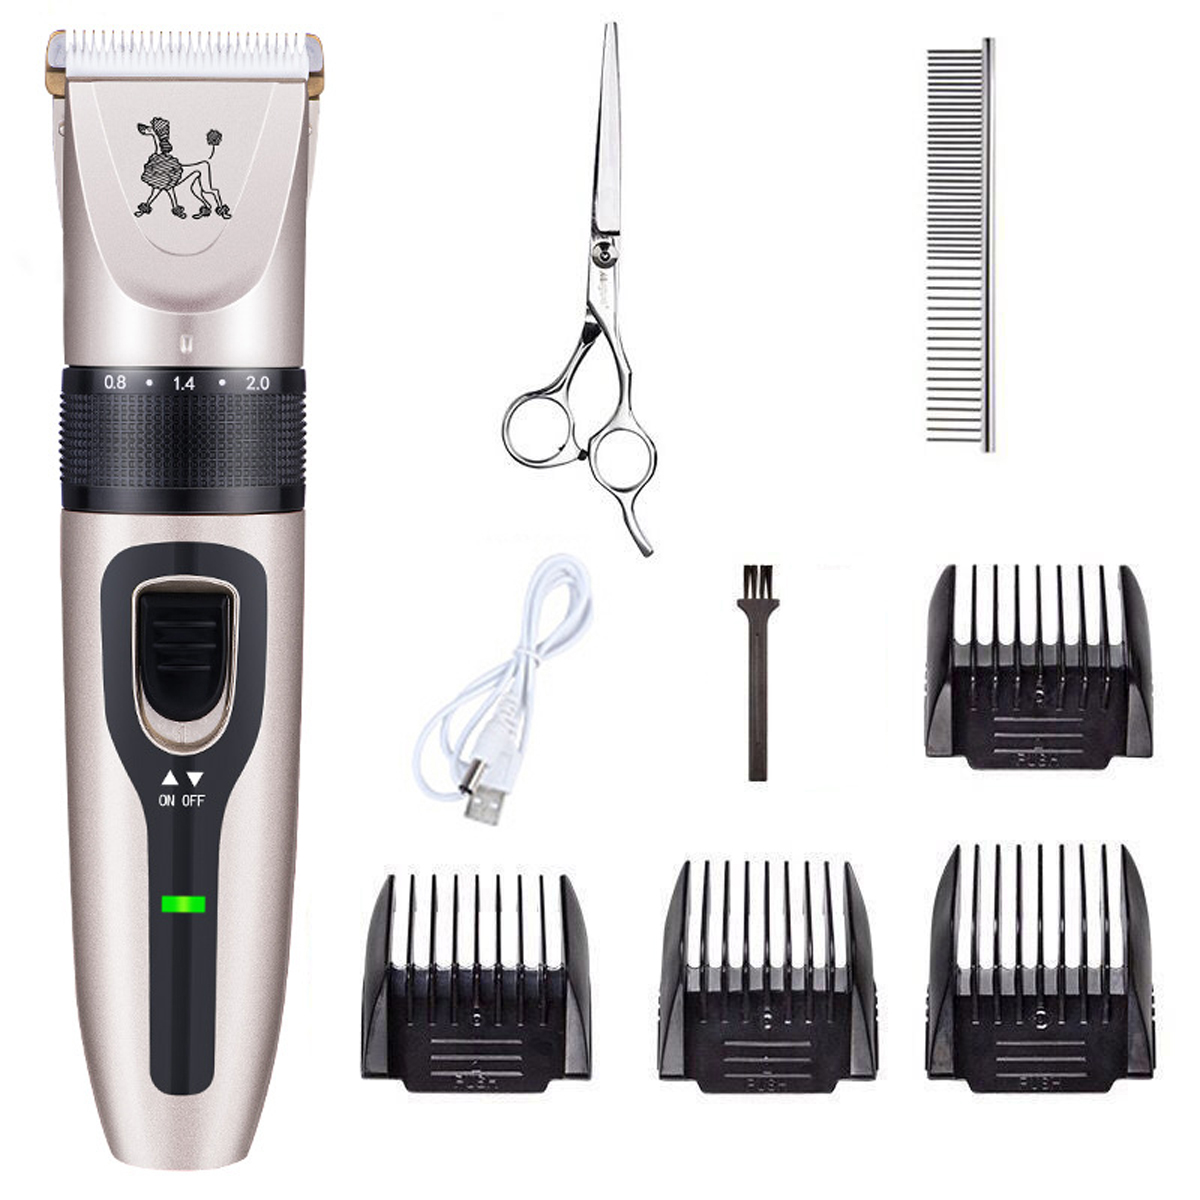 C-350 Rechargeable Pet Dog Cat Grooming Clippers Hair Trimmer Groomer Shaver Quiet Clipper